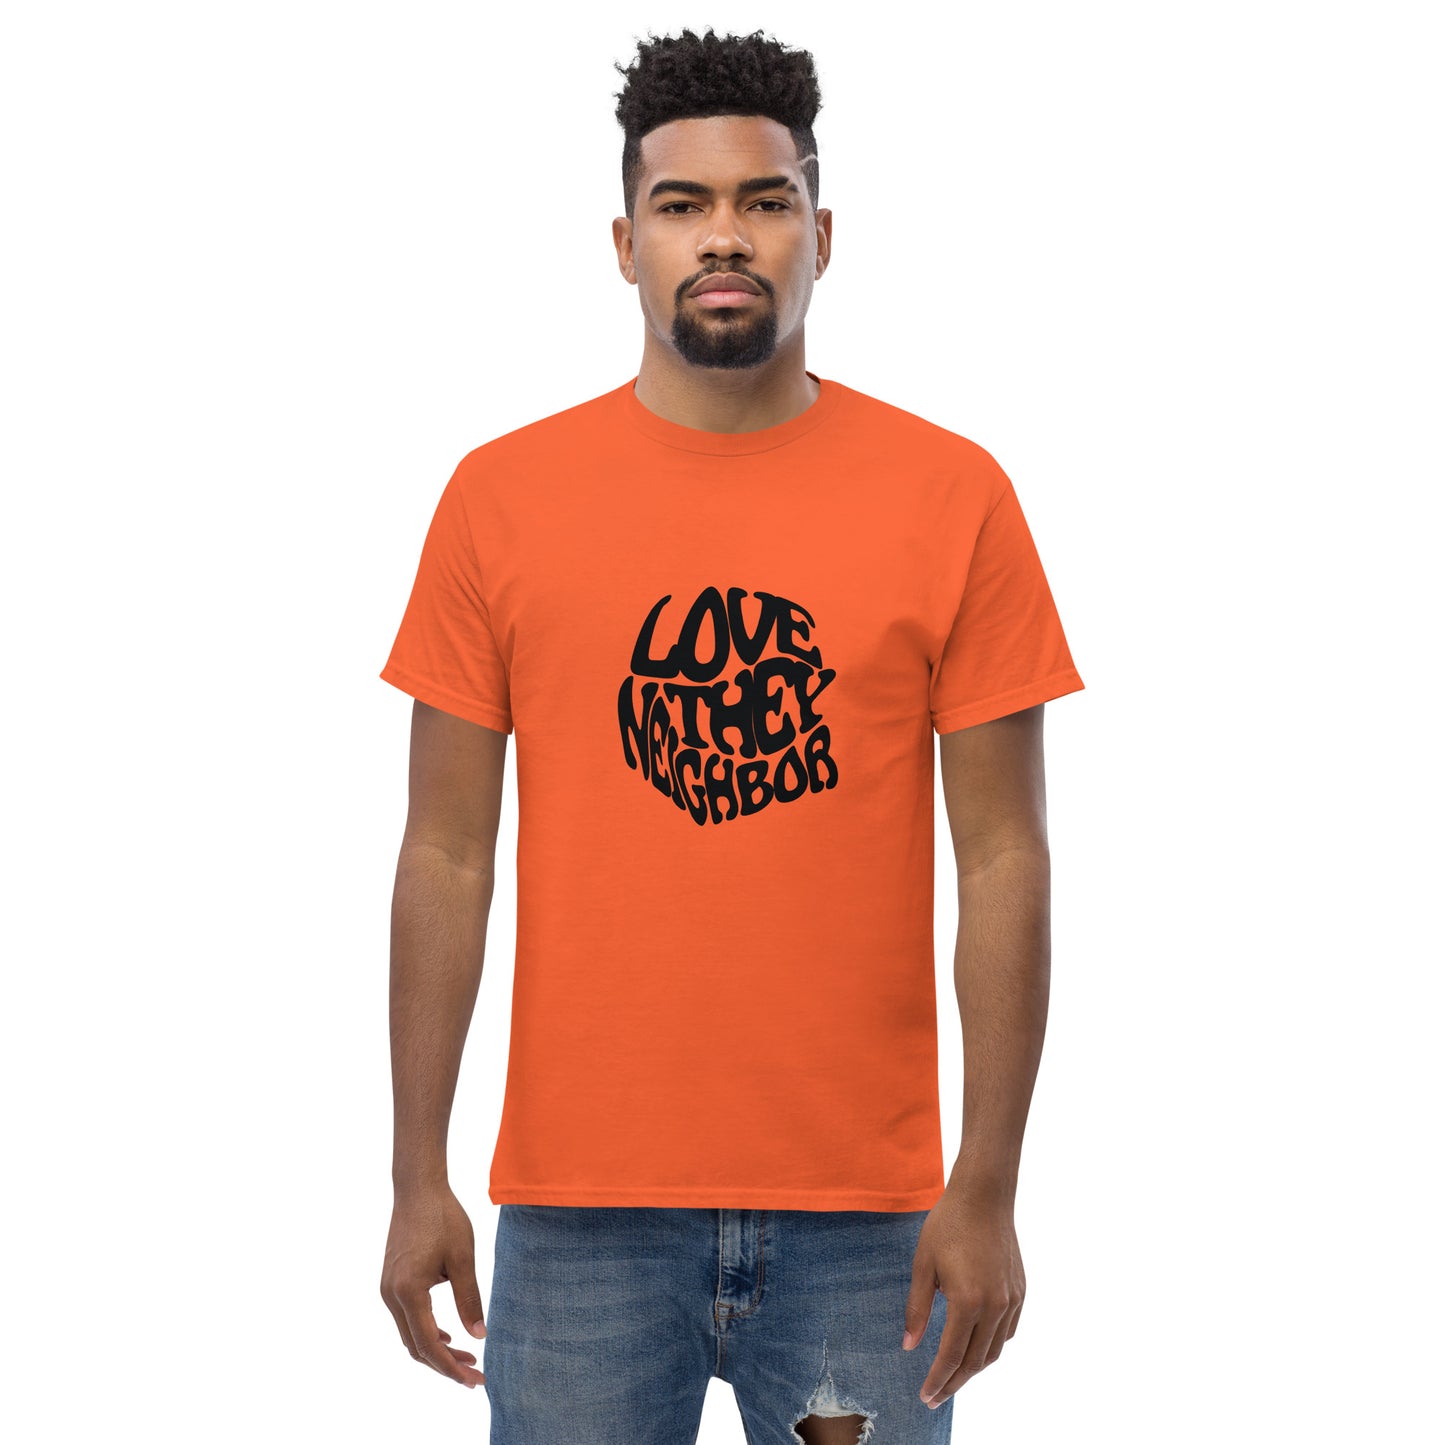 LOVE THEY NEIGHBOR (classic tee) (extended sizing)